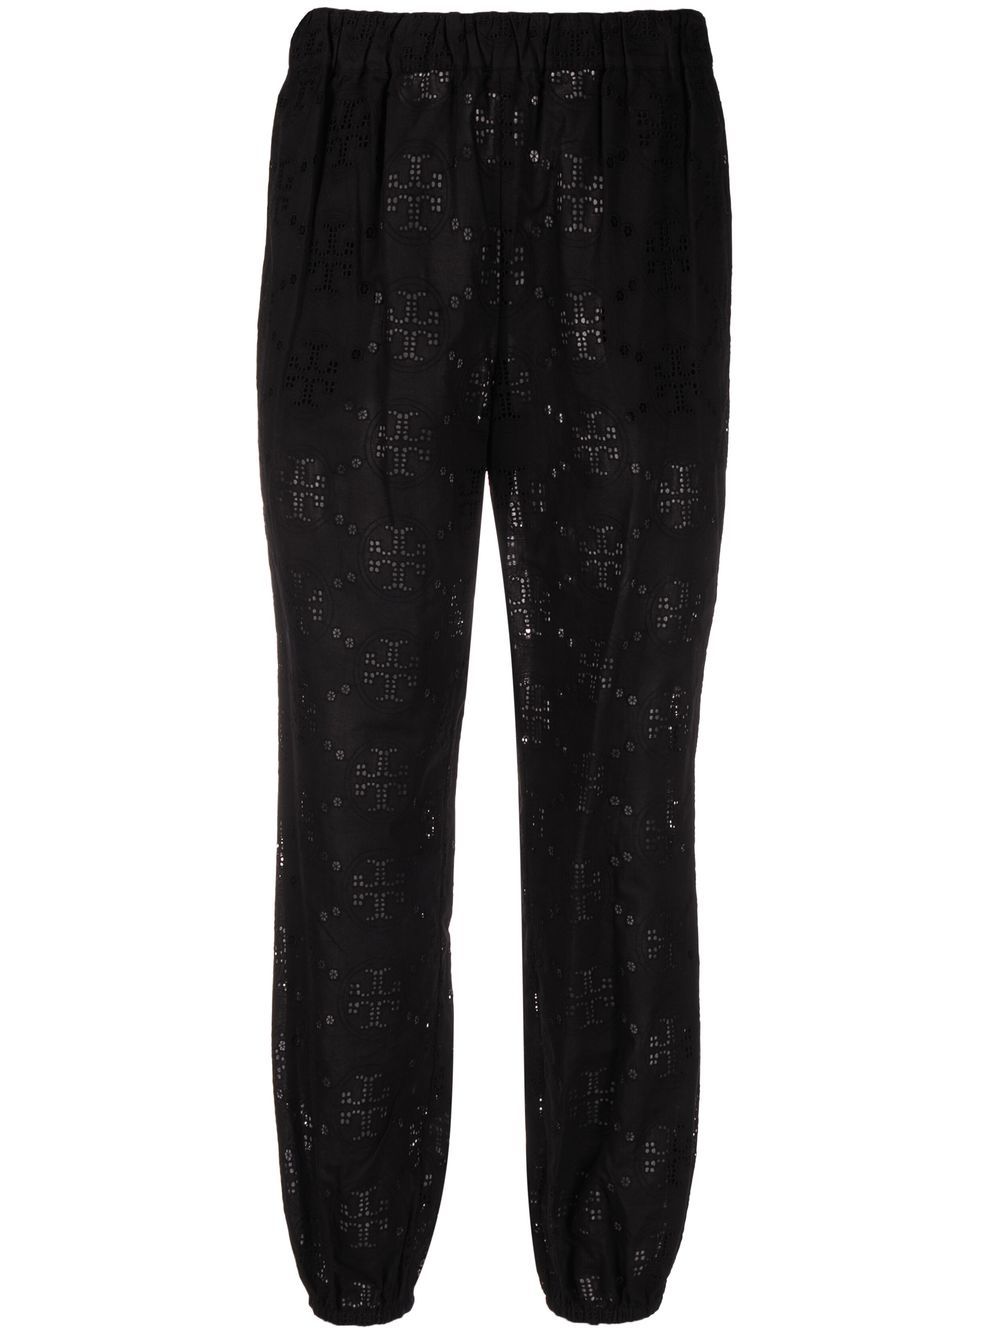 Tory Burch broderie anglaise cotton trousers - Black von Tory Burch